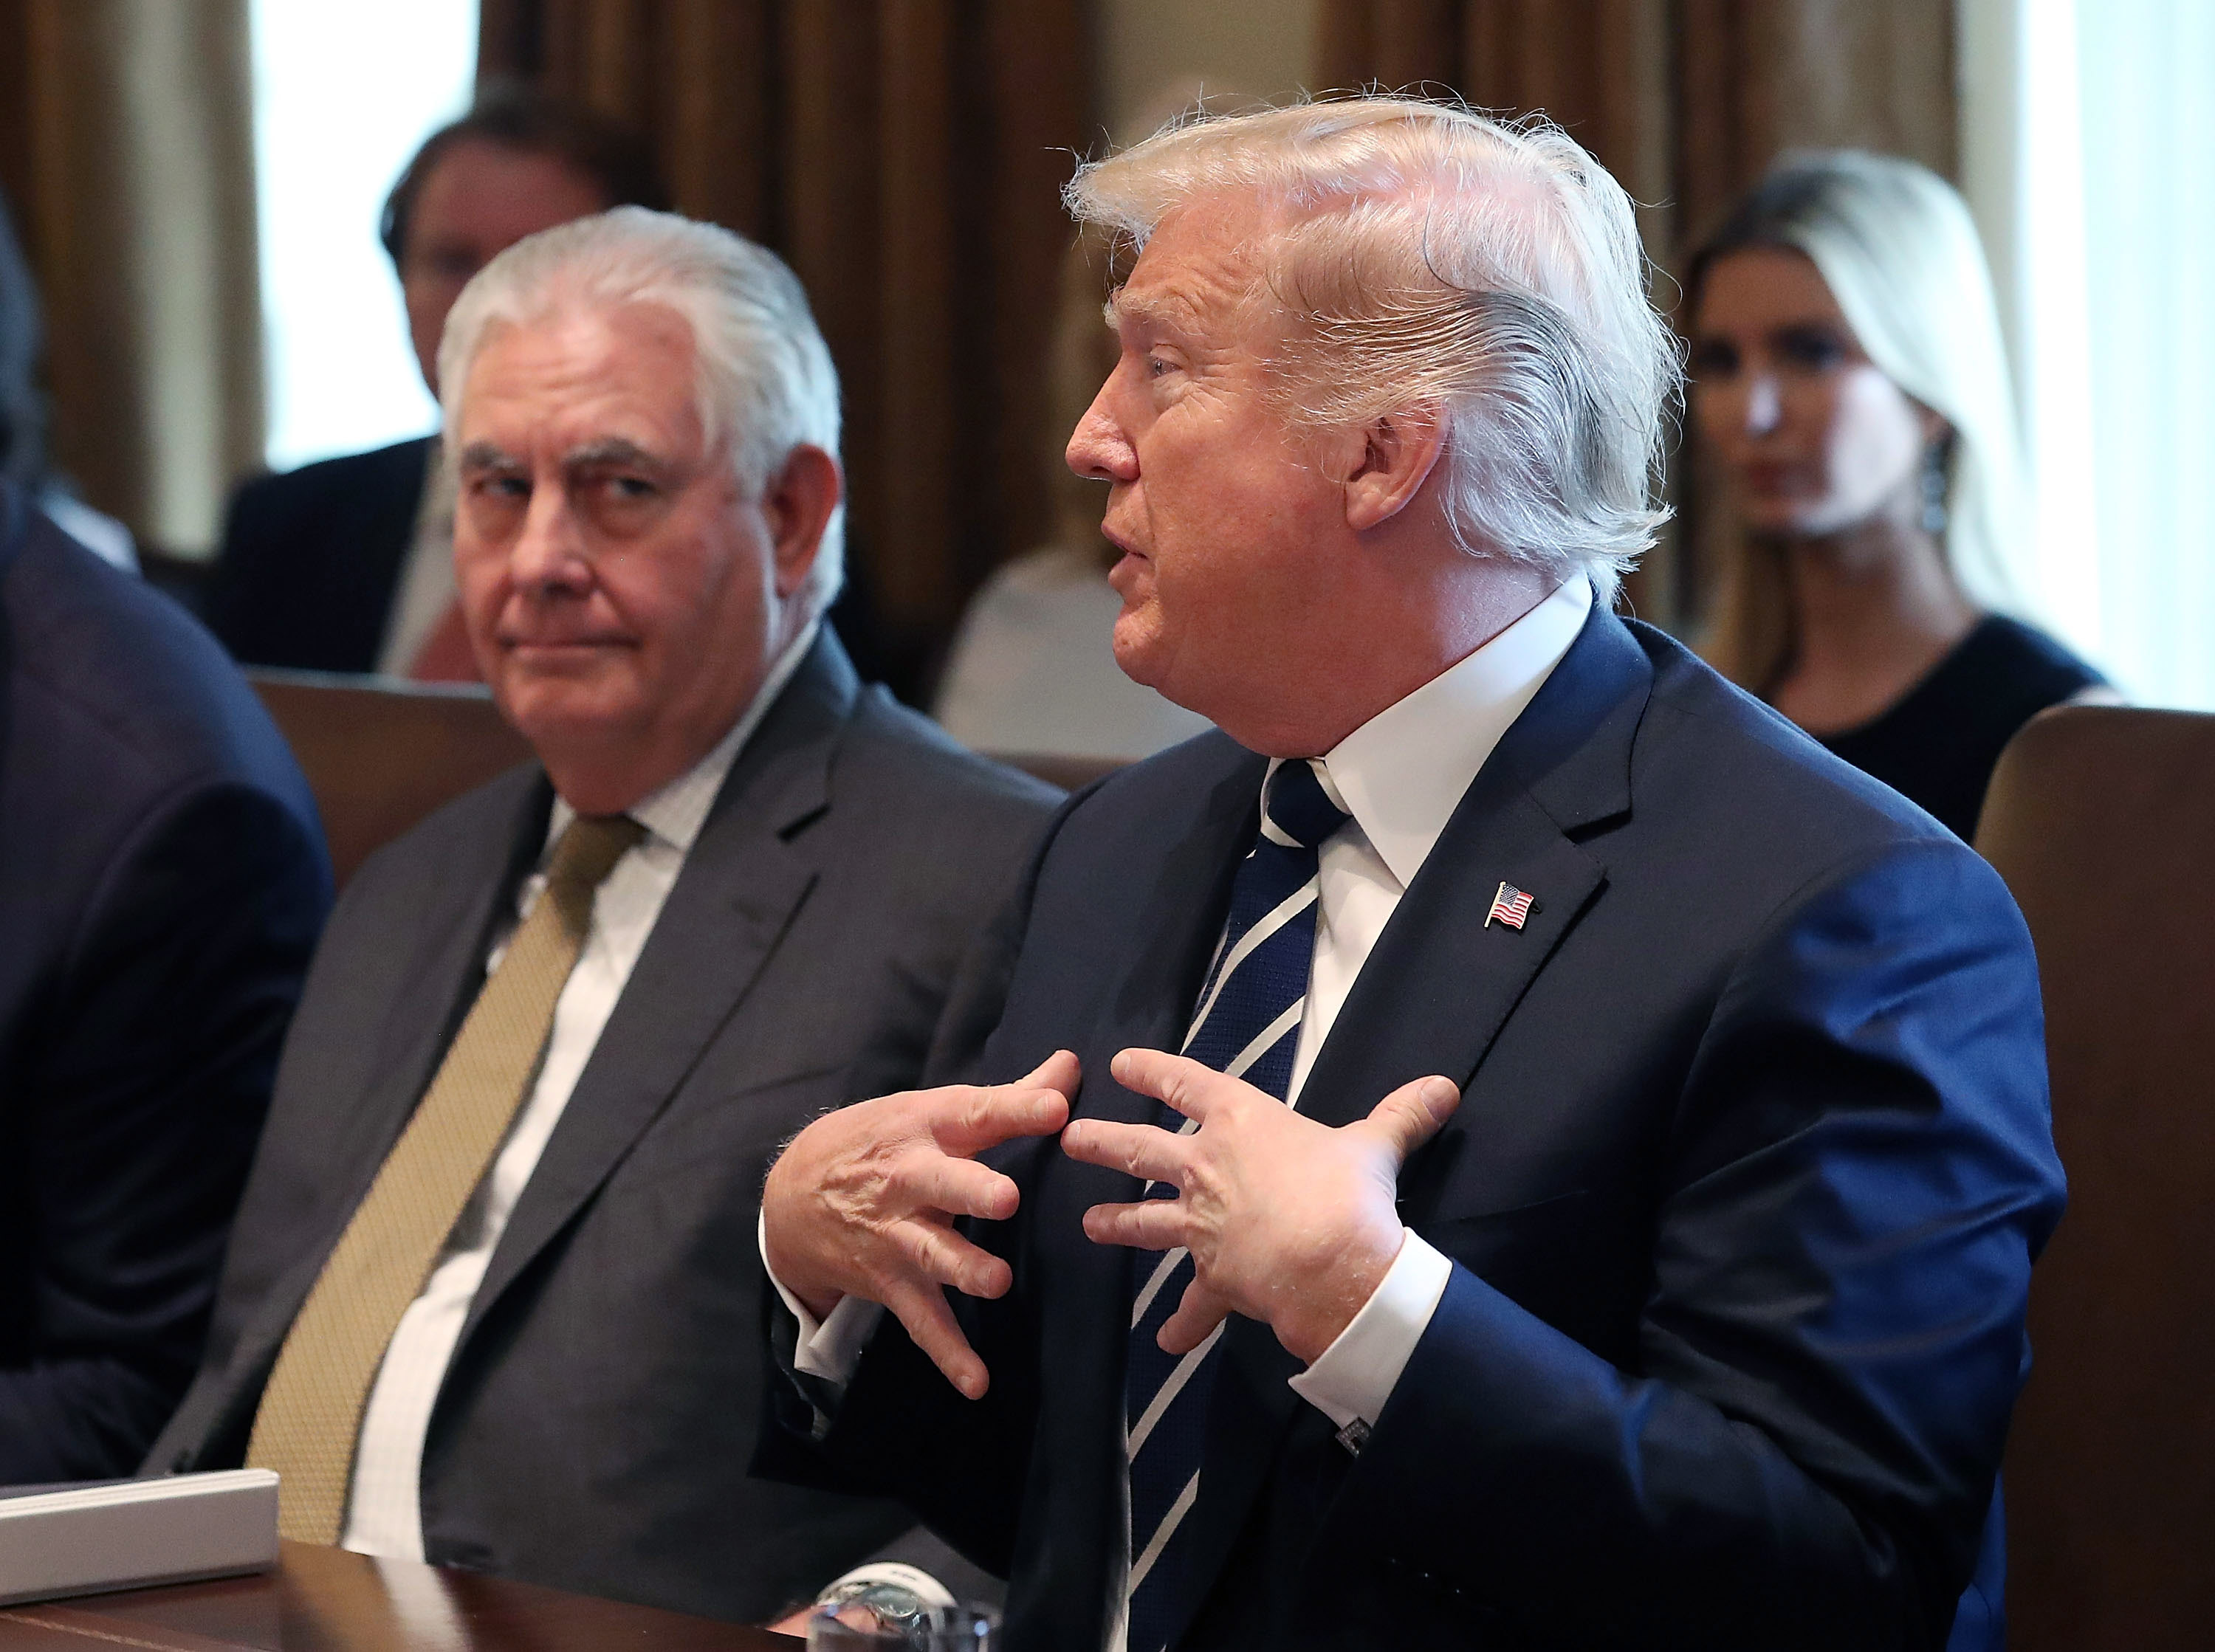 U.S. President Donald Trump, joined by U.S. Secretary of State Rex Tillerson on Oct. 16, 2017 in Washington D.C. (Mark Wilson—Getty Images)